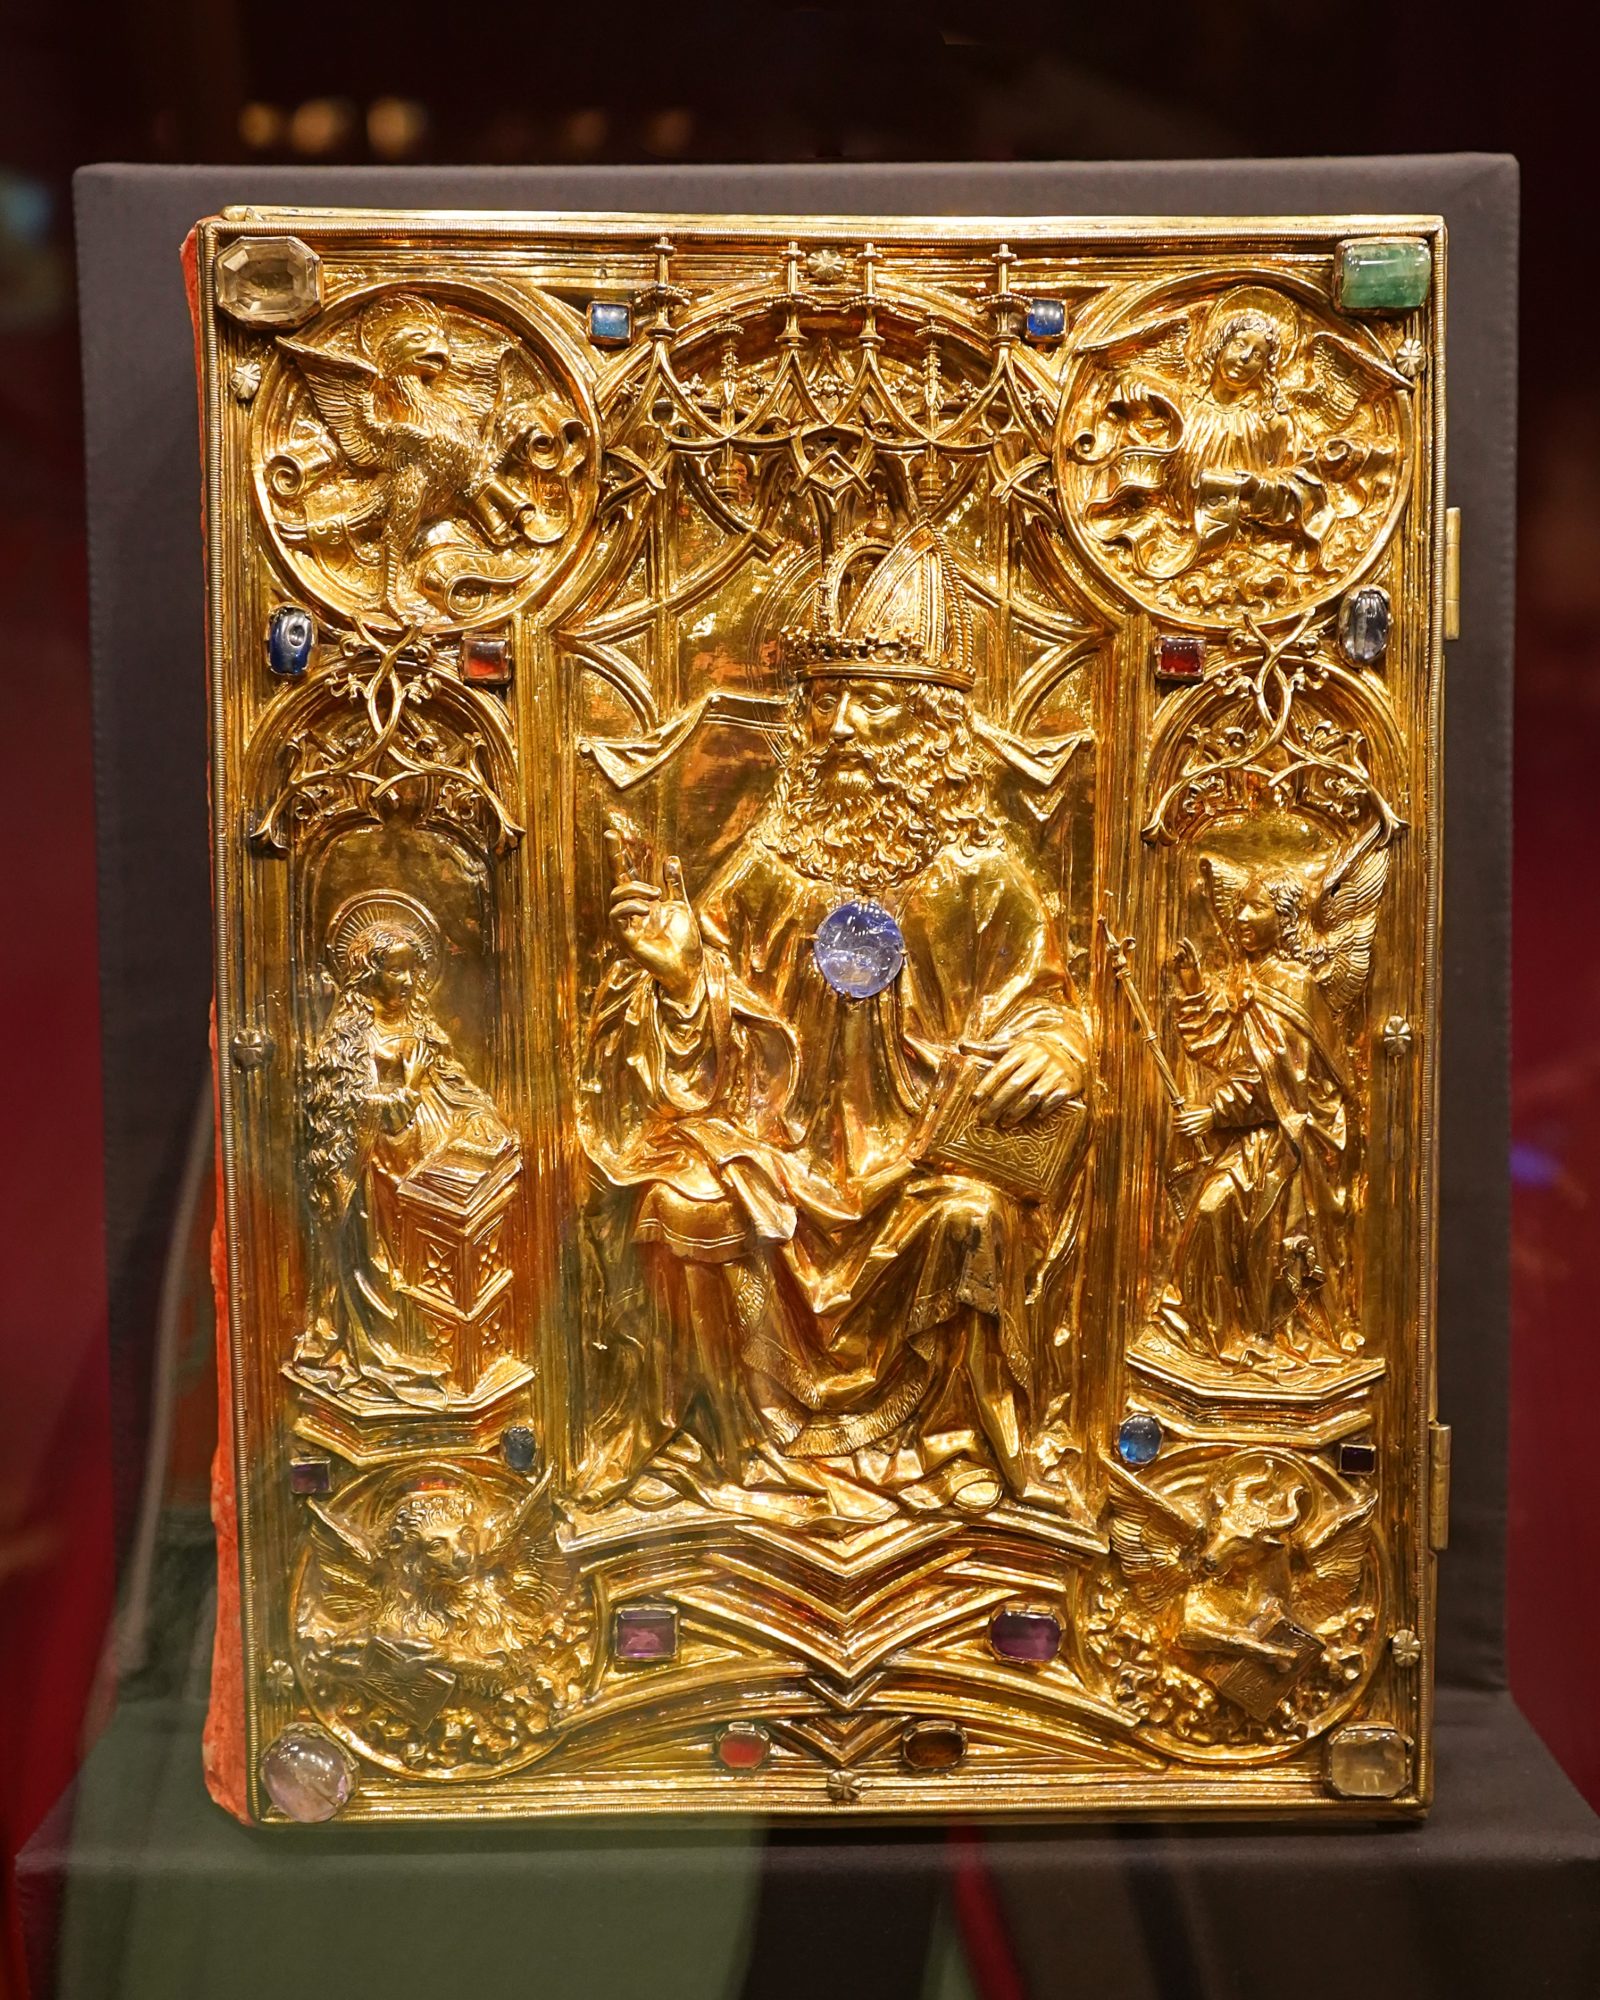 Gold-plated and sculpted cover of a book